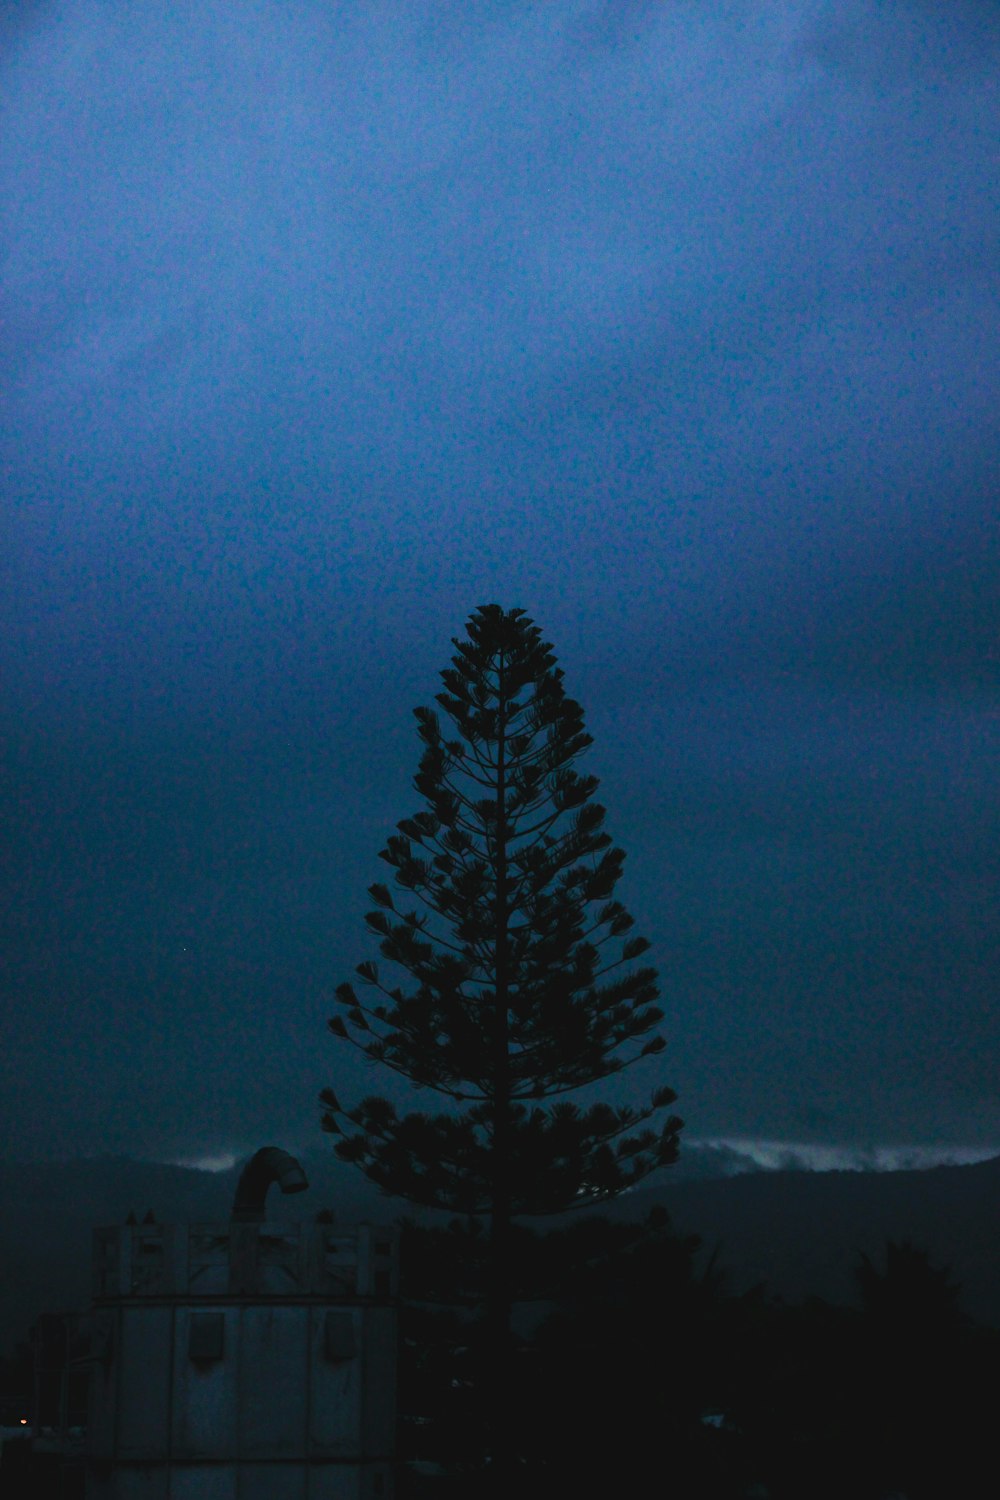 a lone pine tree is silhouetted against a dark sky